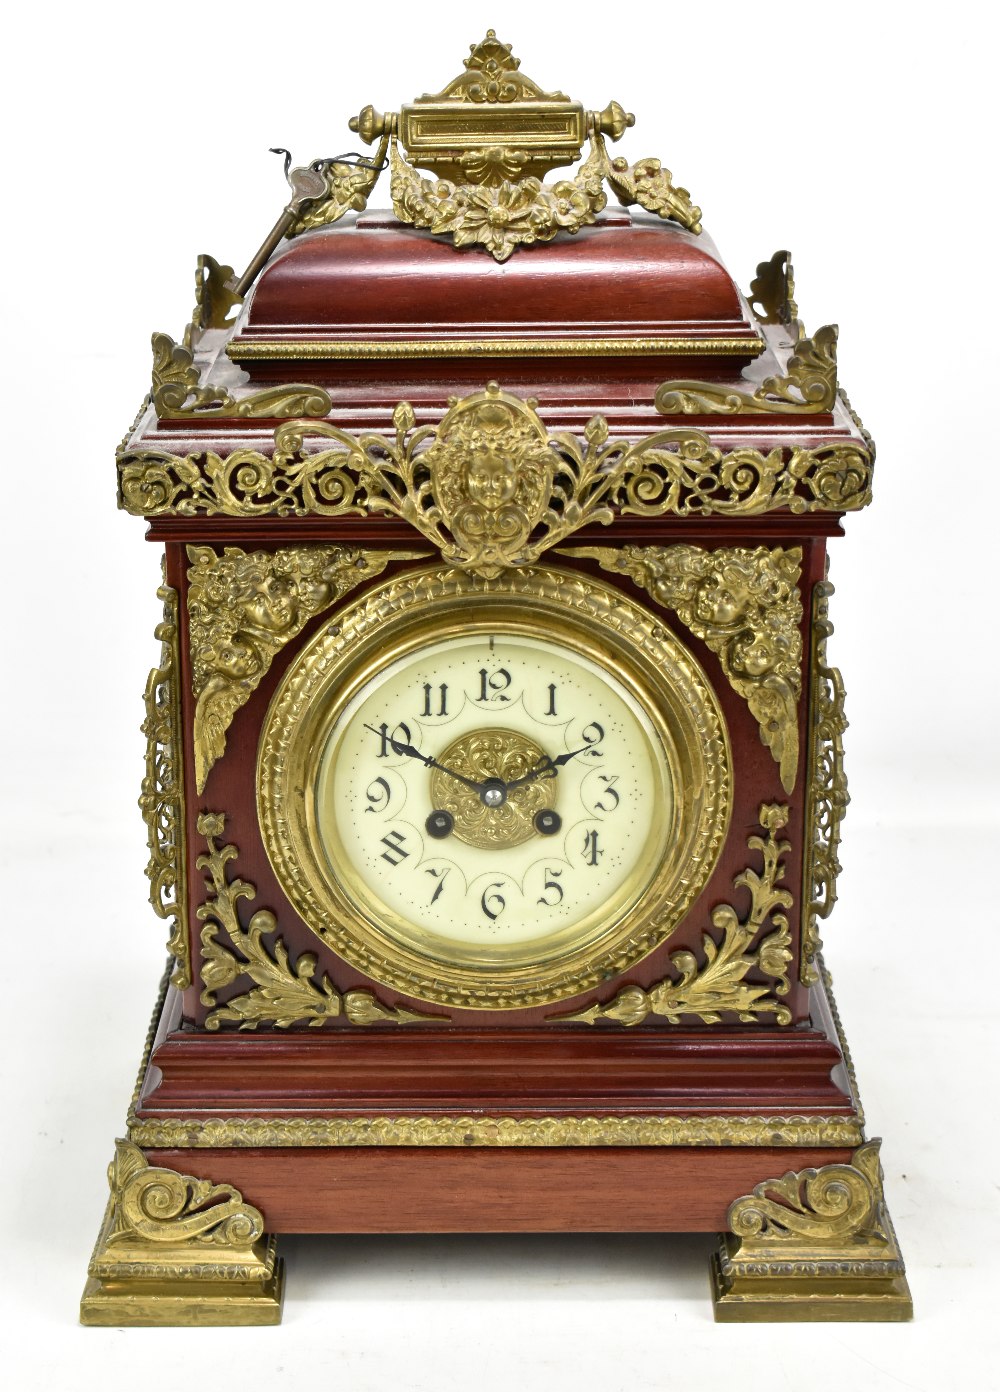 A large late 19th/early 20th century mantel clock with gilt metal foliate and cherubic mounts, the